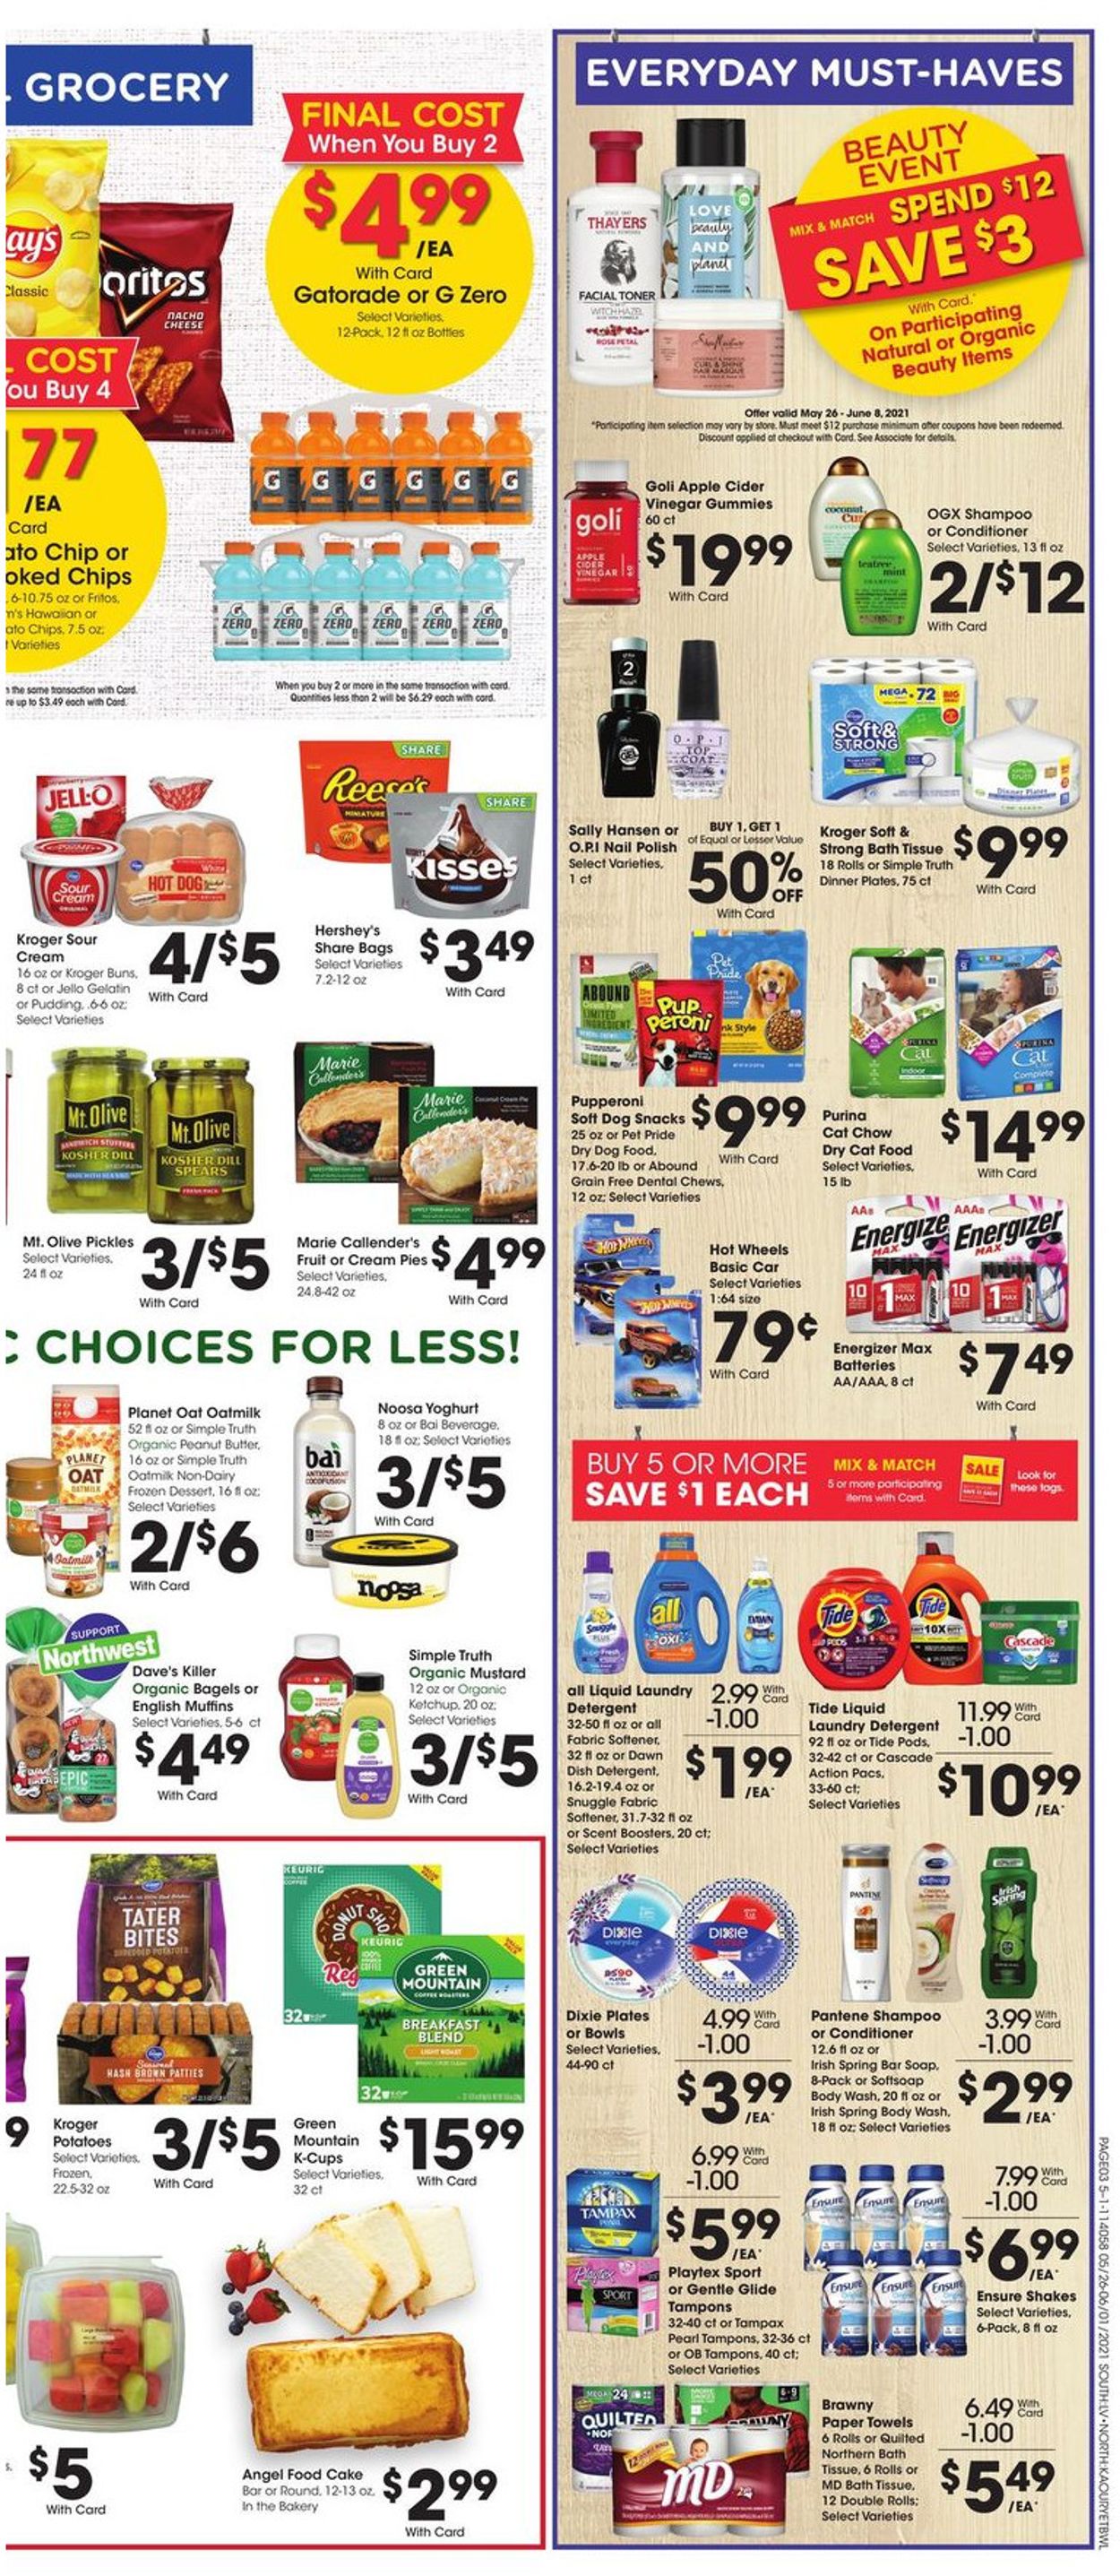 Fred Meyer Weekly Ad Circular - valid 05/26-06/01/2021 (Page 6)